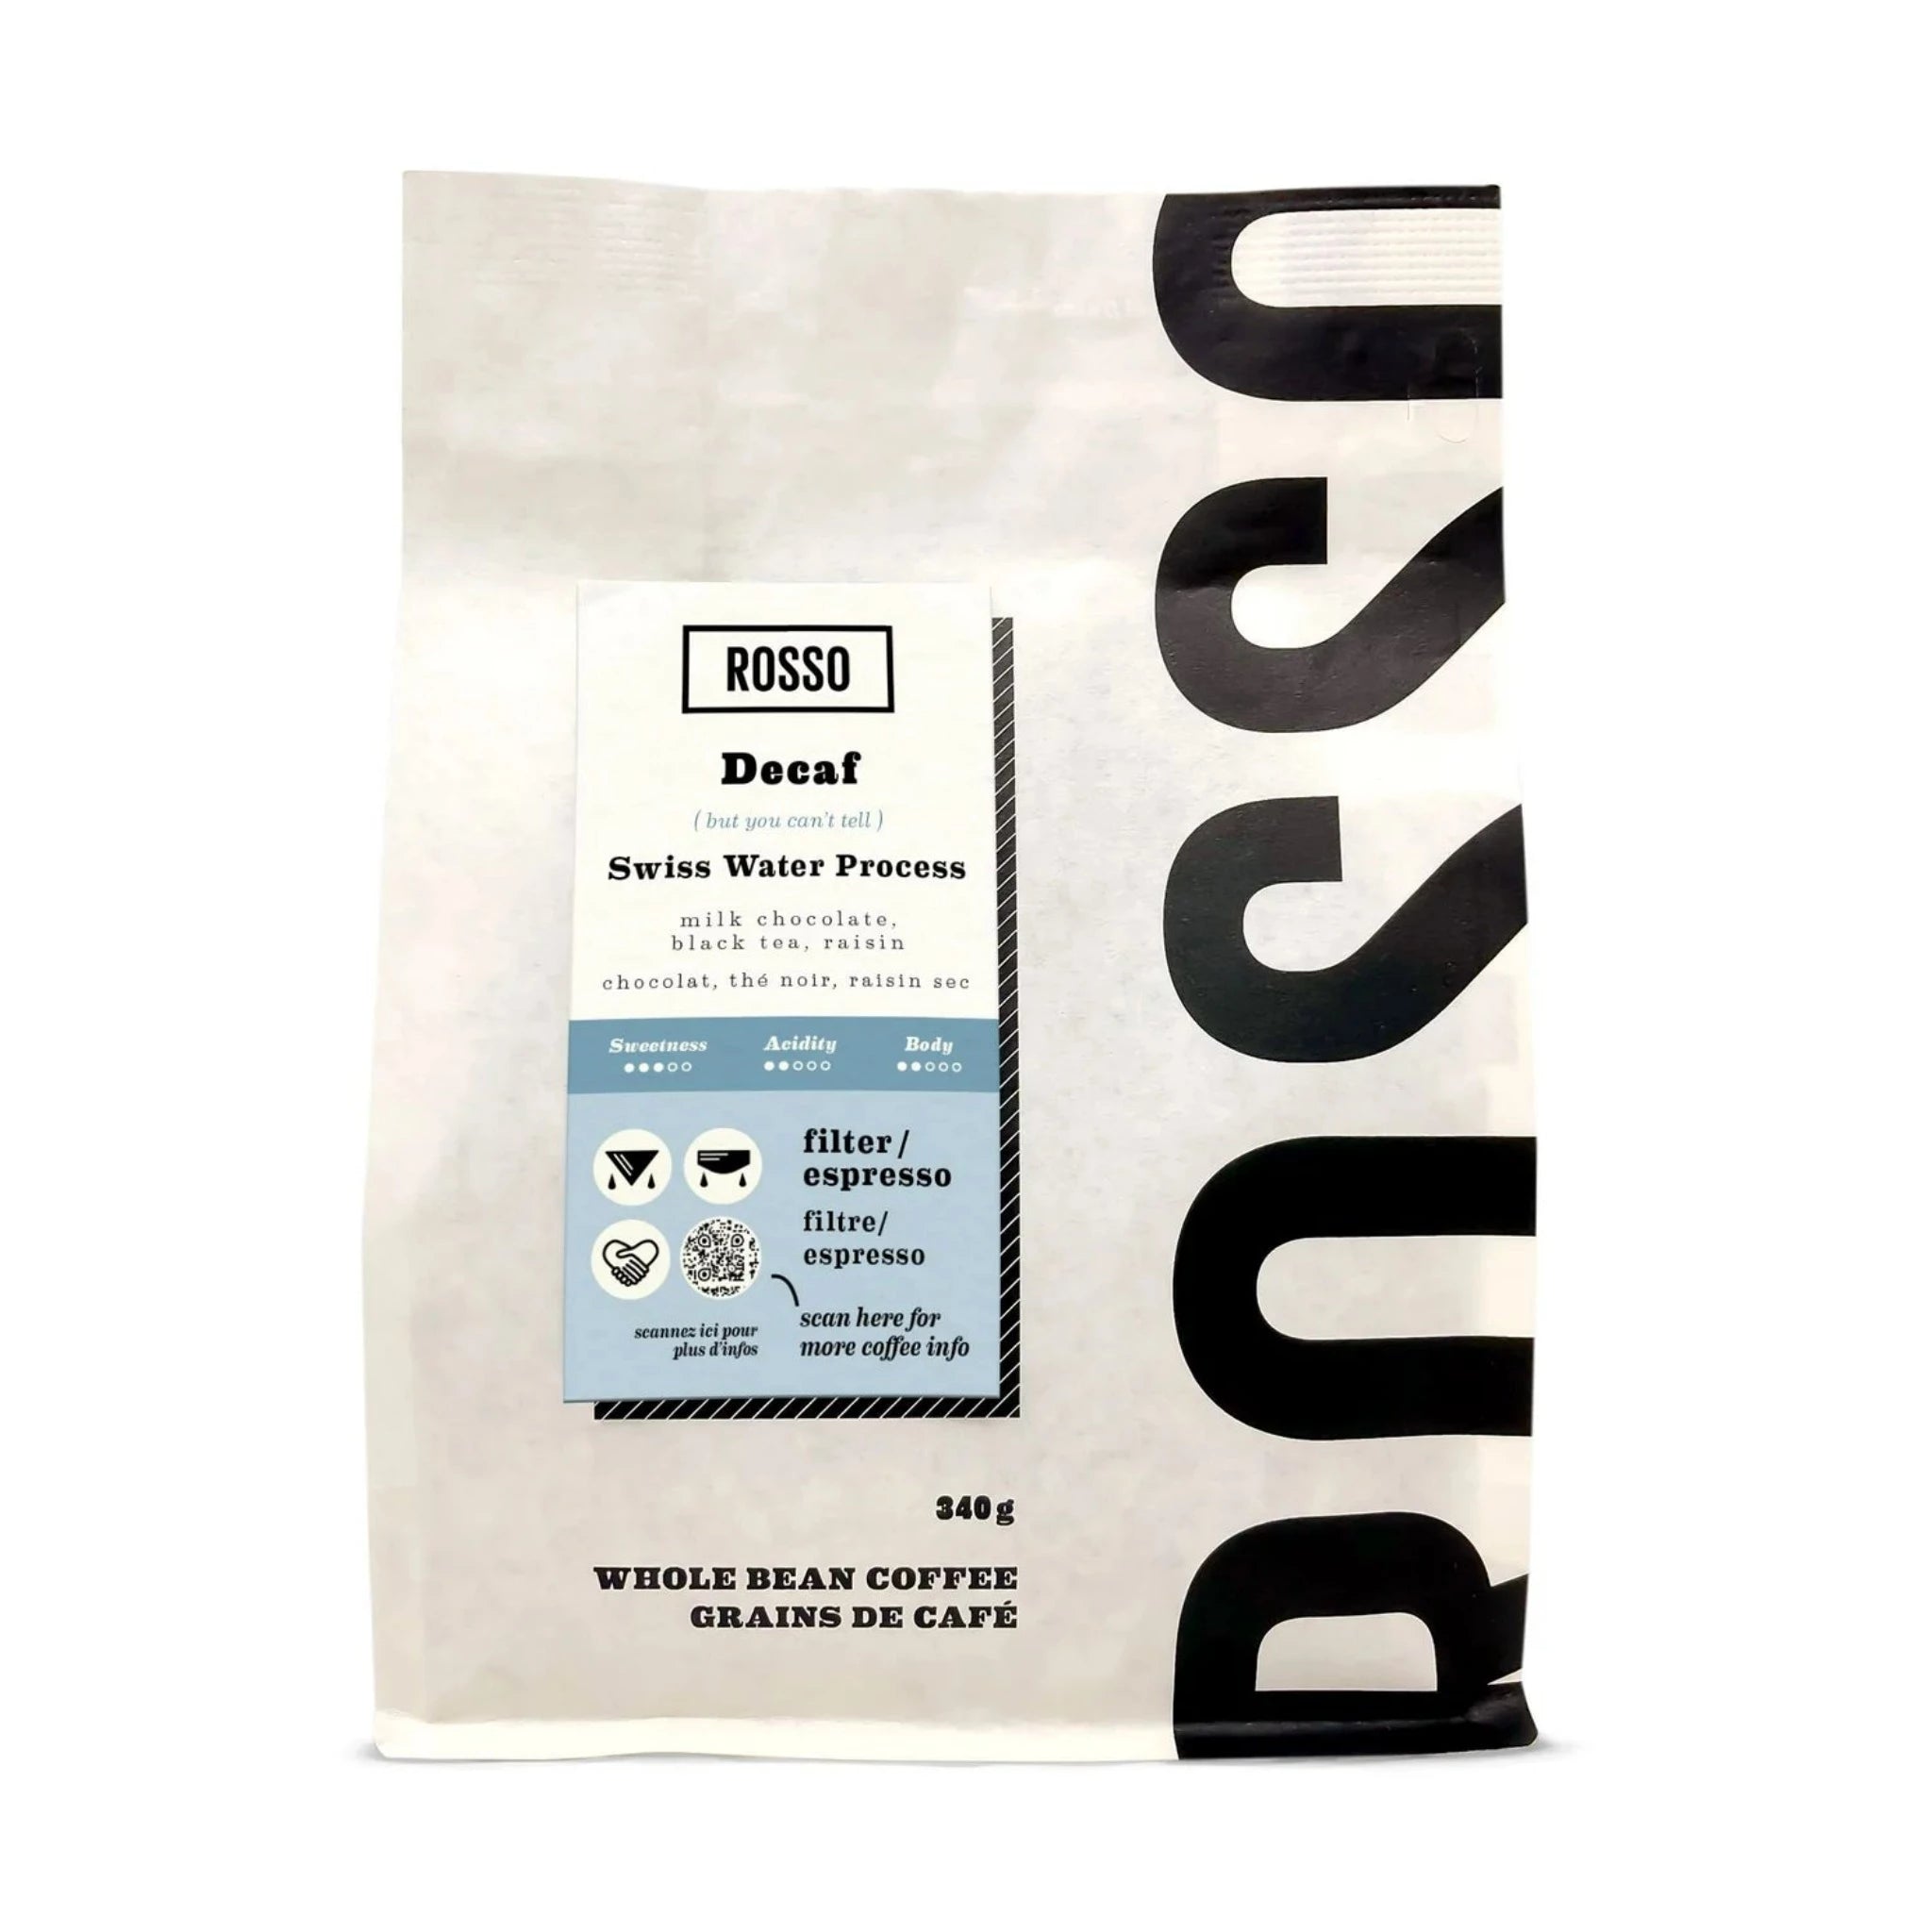 Rosso Coffee Roasters Decaf - Chemical-free Swiss Water Process. Enjoy 99.9% decaffeinated coffee with tasting notes of milk chocolate and raisin. Shop now for a delicious caffeine-free experience!